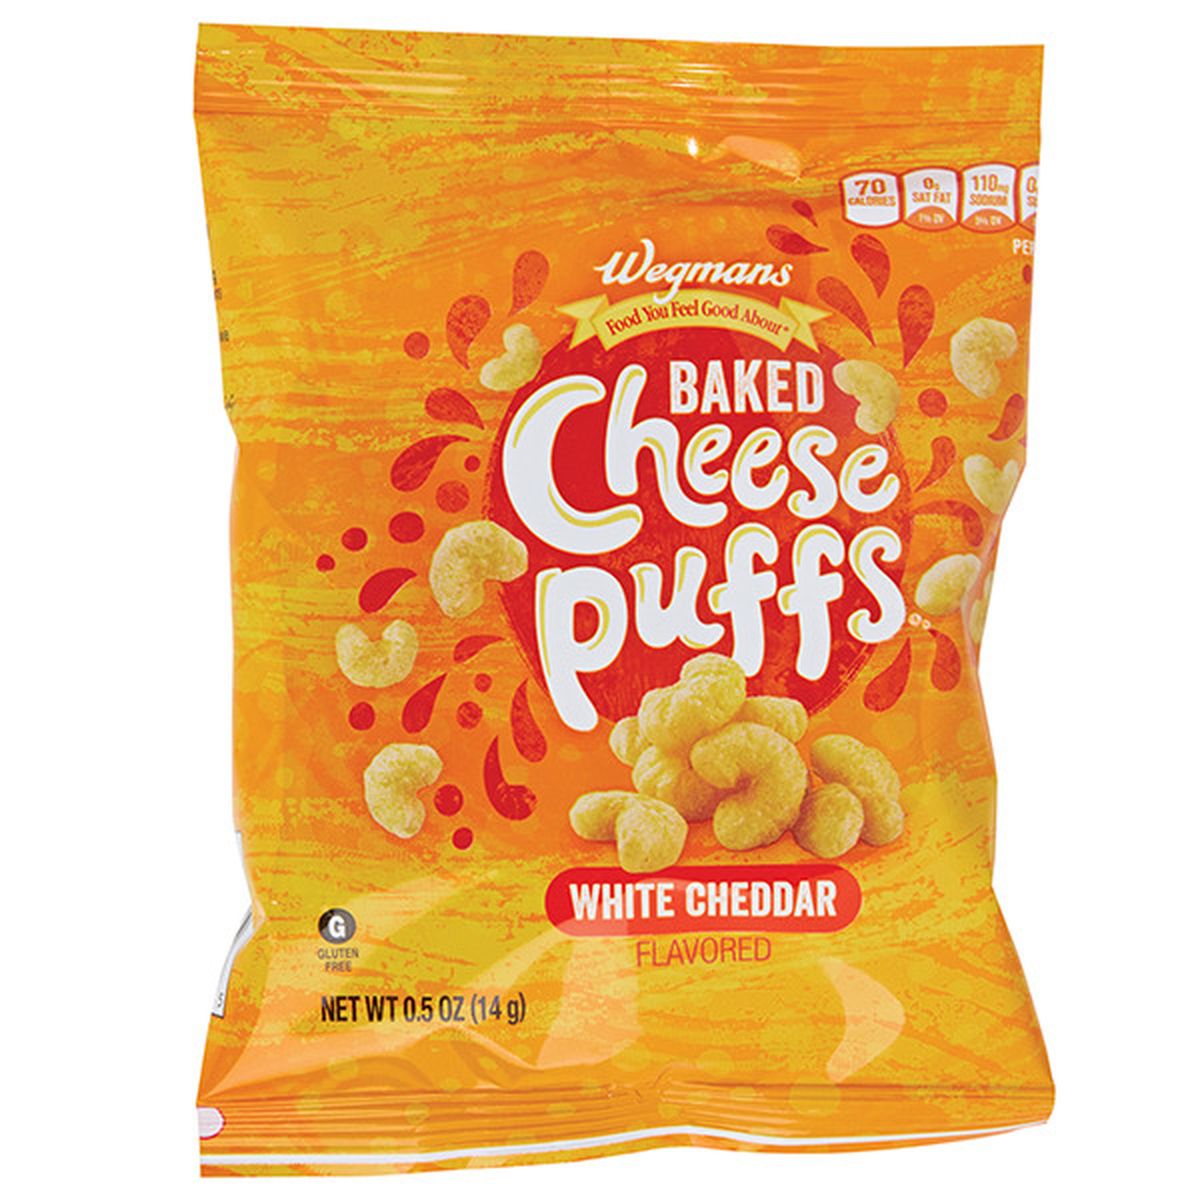 Calories in Wegmans Baked Cheese Puffs, White Cheddar Flavored